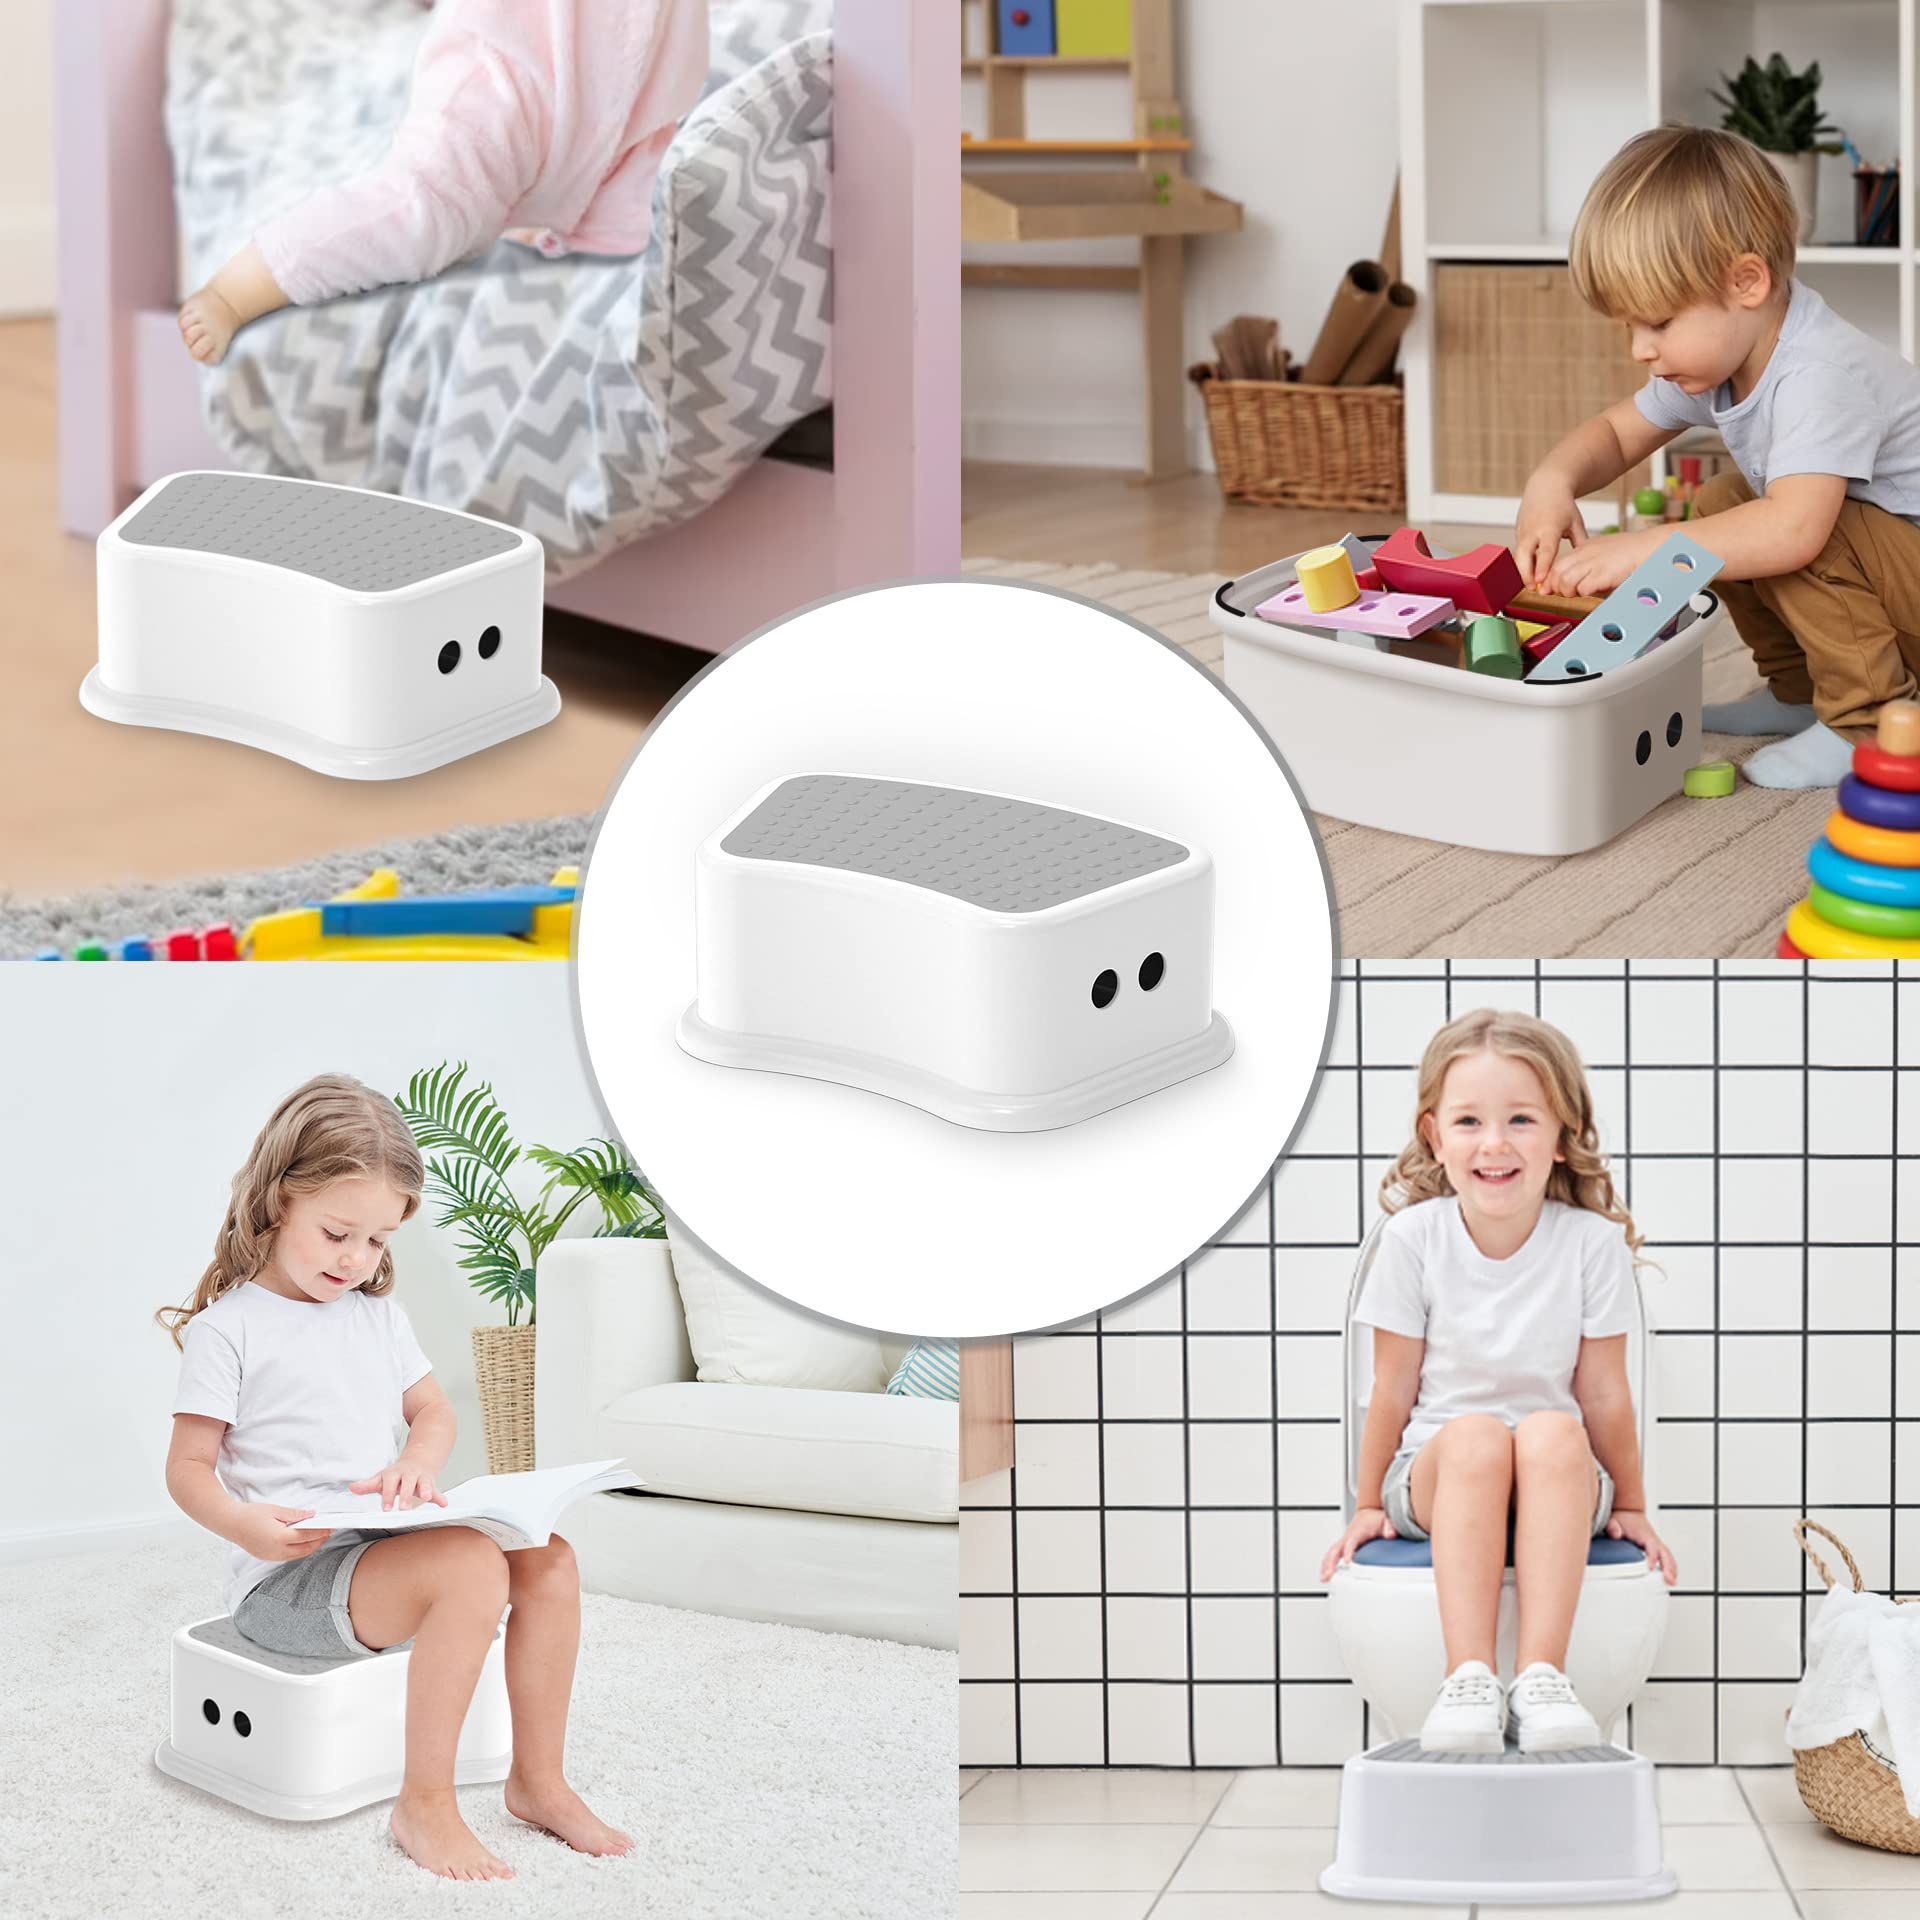 UNCLE WU 2 Pack Kids Step Stool - Toddler Step Up Stool for Kitchen - Bathroom Safety Bottom as Potty Training Stool - Slip-Resistant Surface1 Step Stool for Kids/Adult (Gray White)